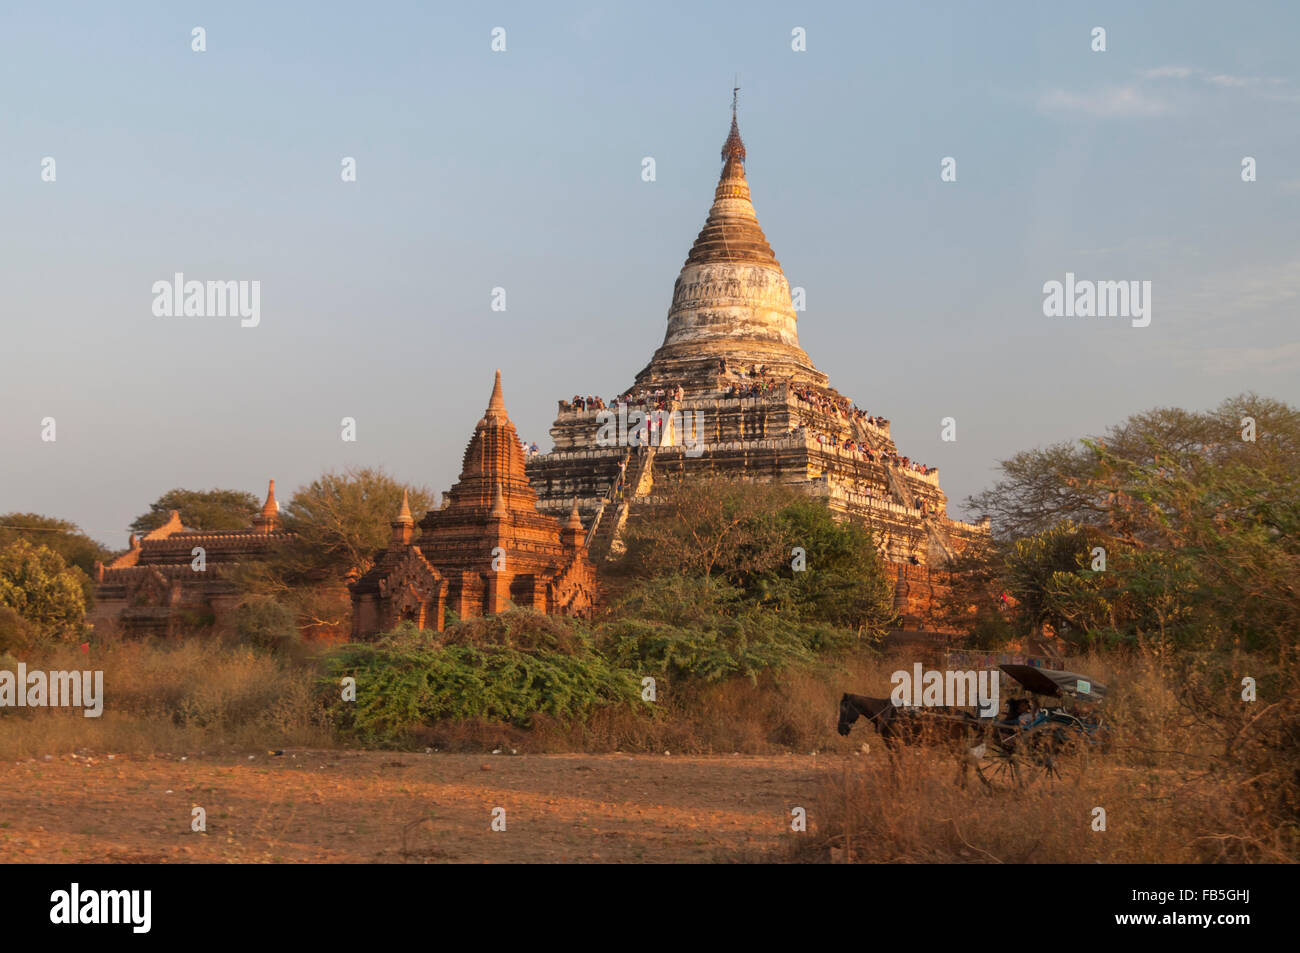 Shwesandaw pagoda in Bagan/Pagan, Mandalay Region, Myanmar, with tourists awaiting sunset. Horse cart in the foreground. Stock Photo